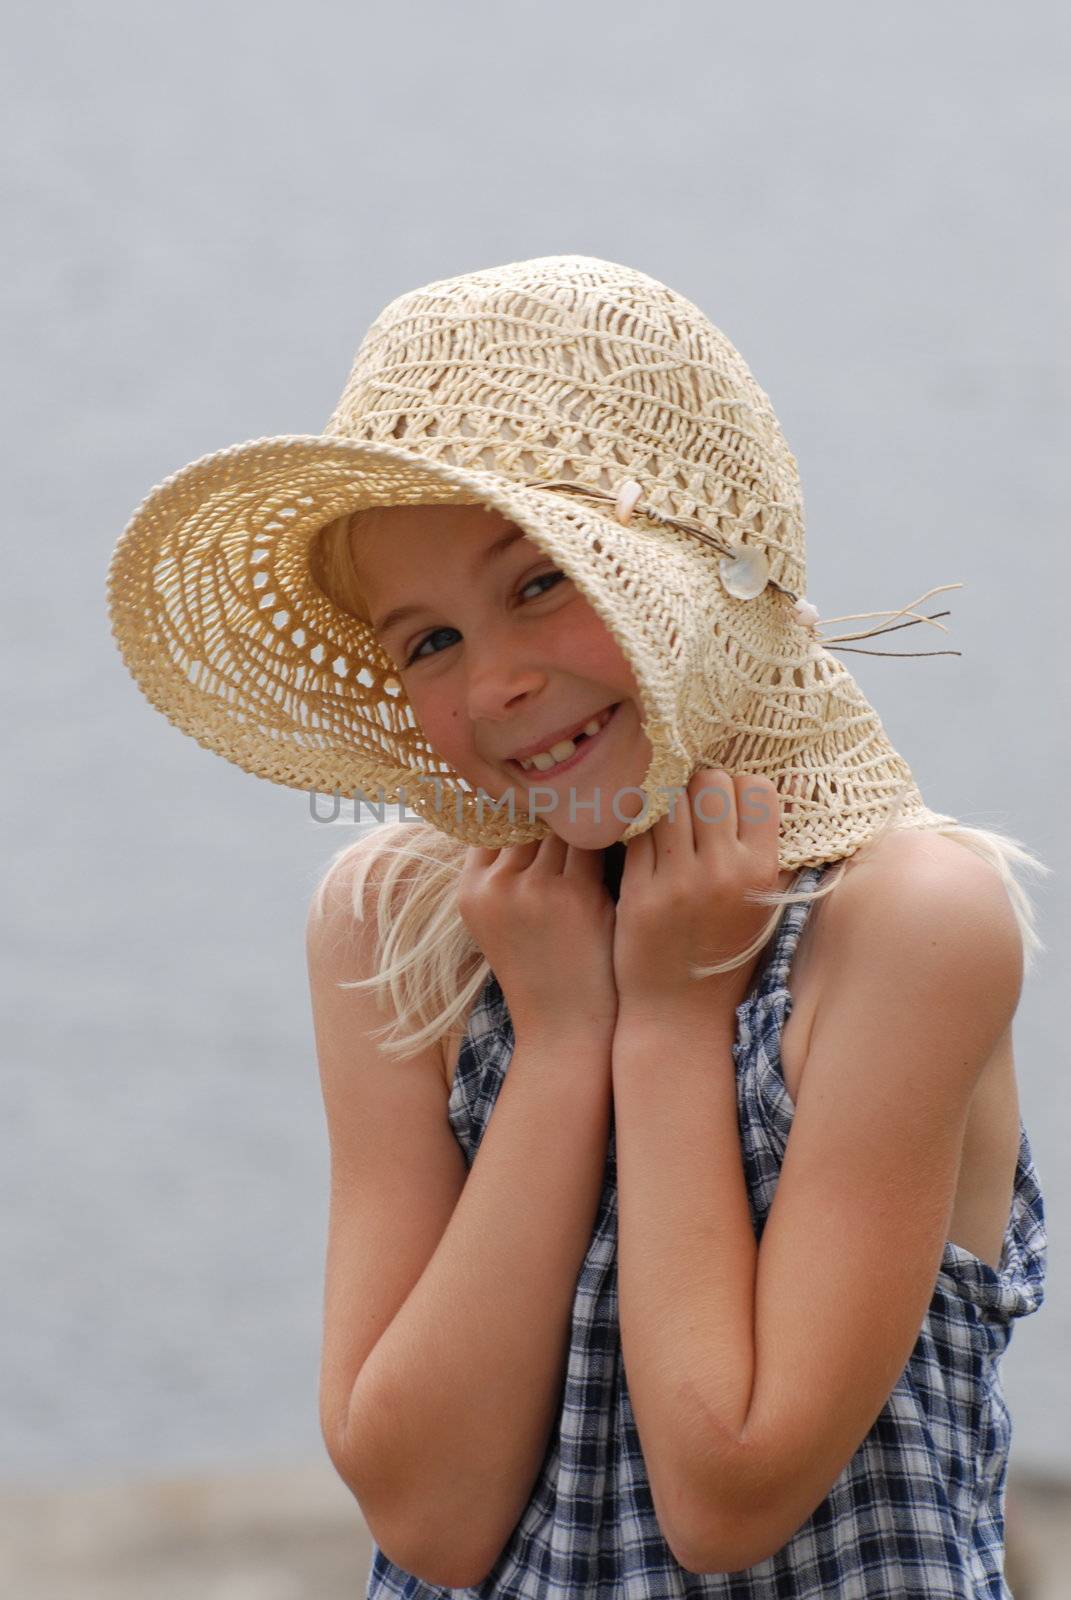 Smiling girl with straw hat. Please note! No negative use allowed